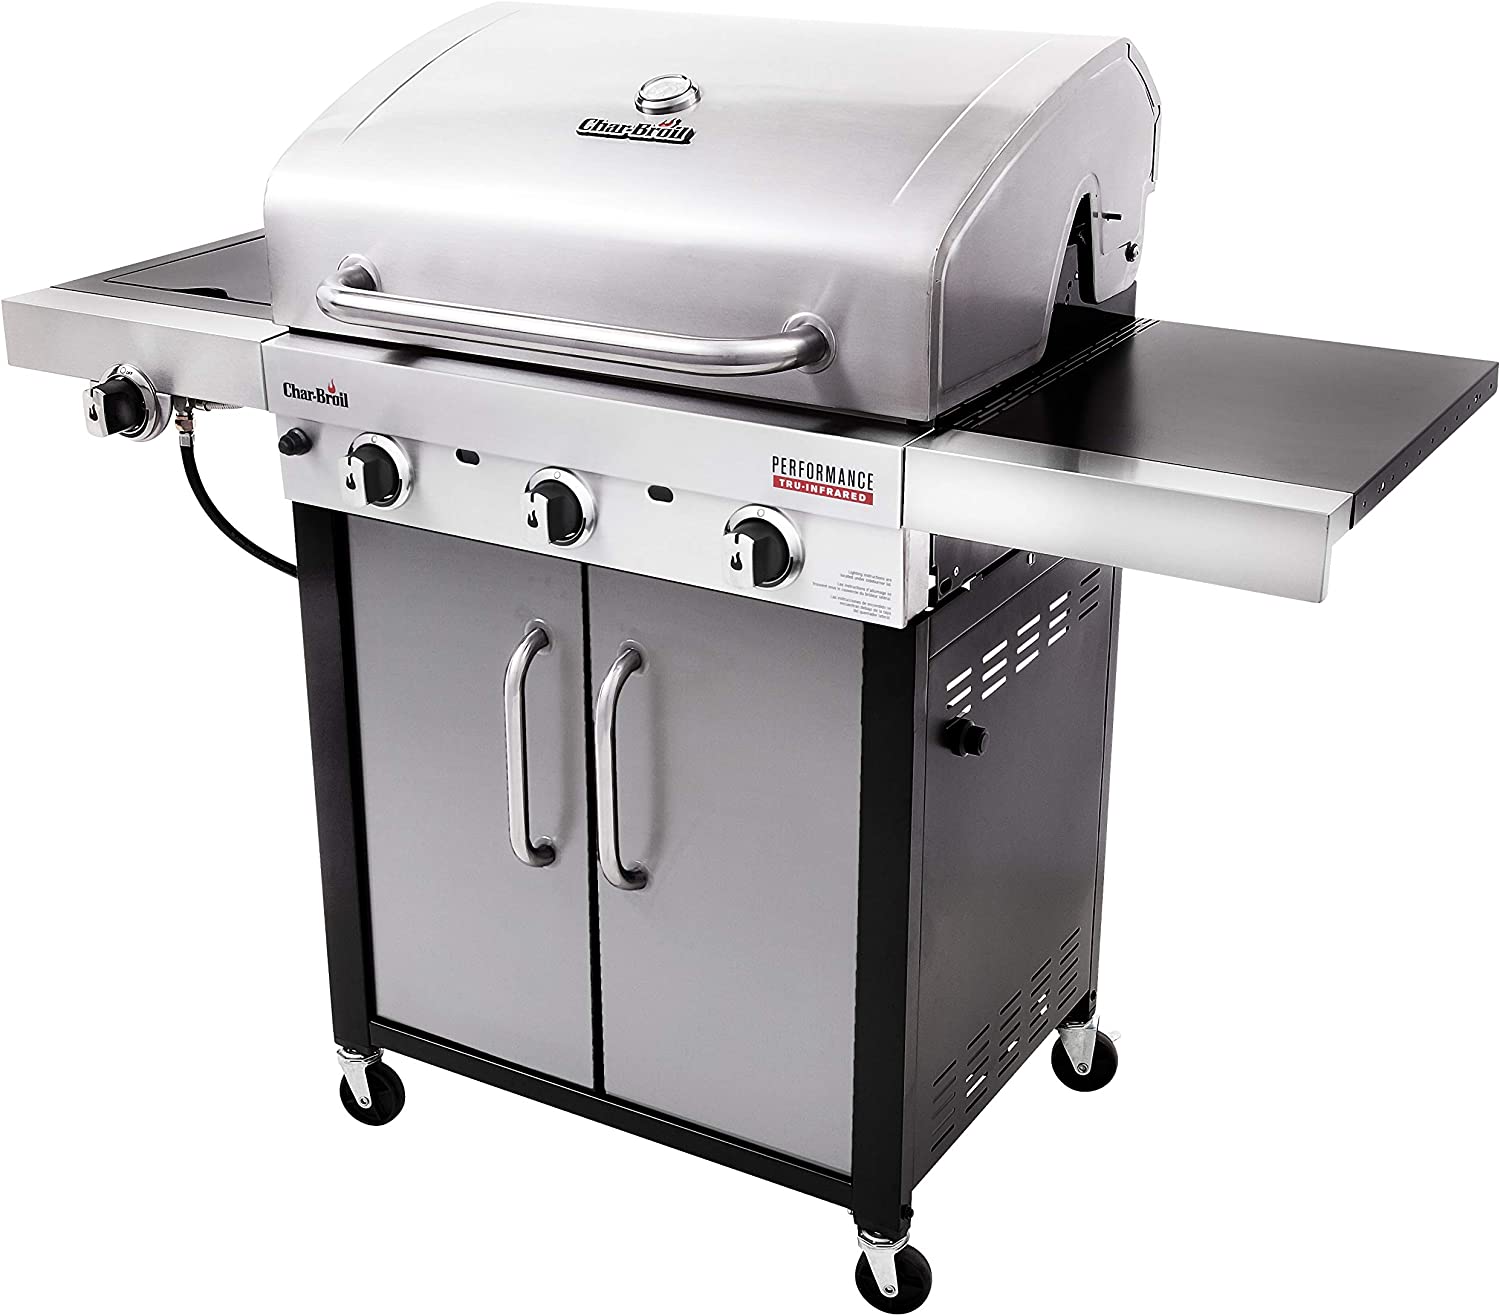 Char-Broil Performance Series™ TRU-Infrared™ 3-Burner Gas Grill - image 3 of 6